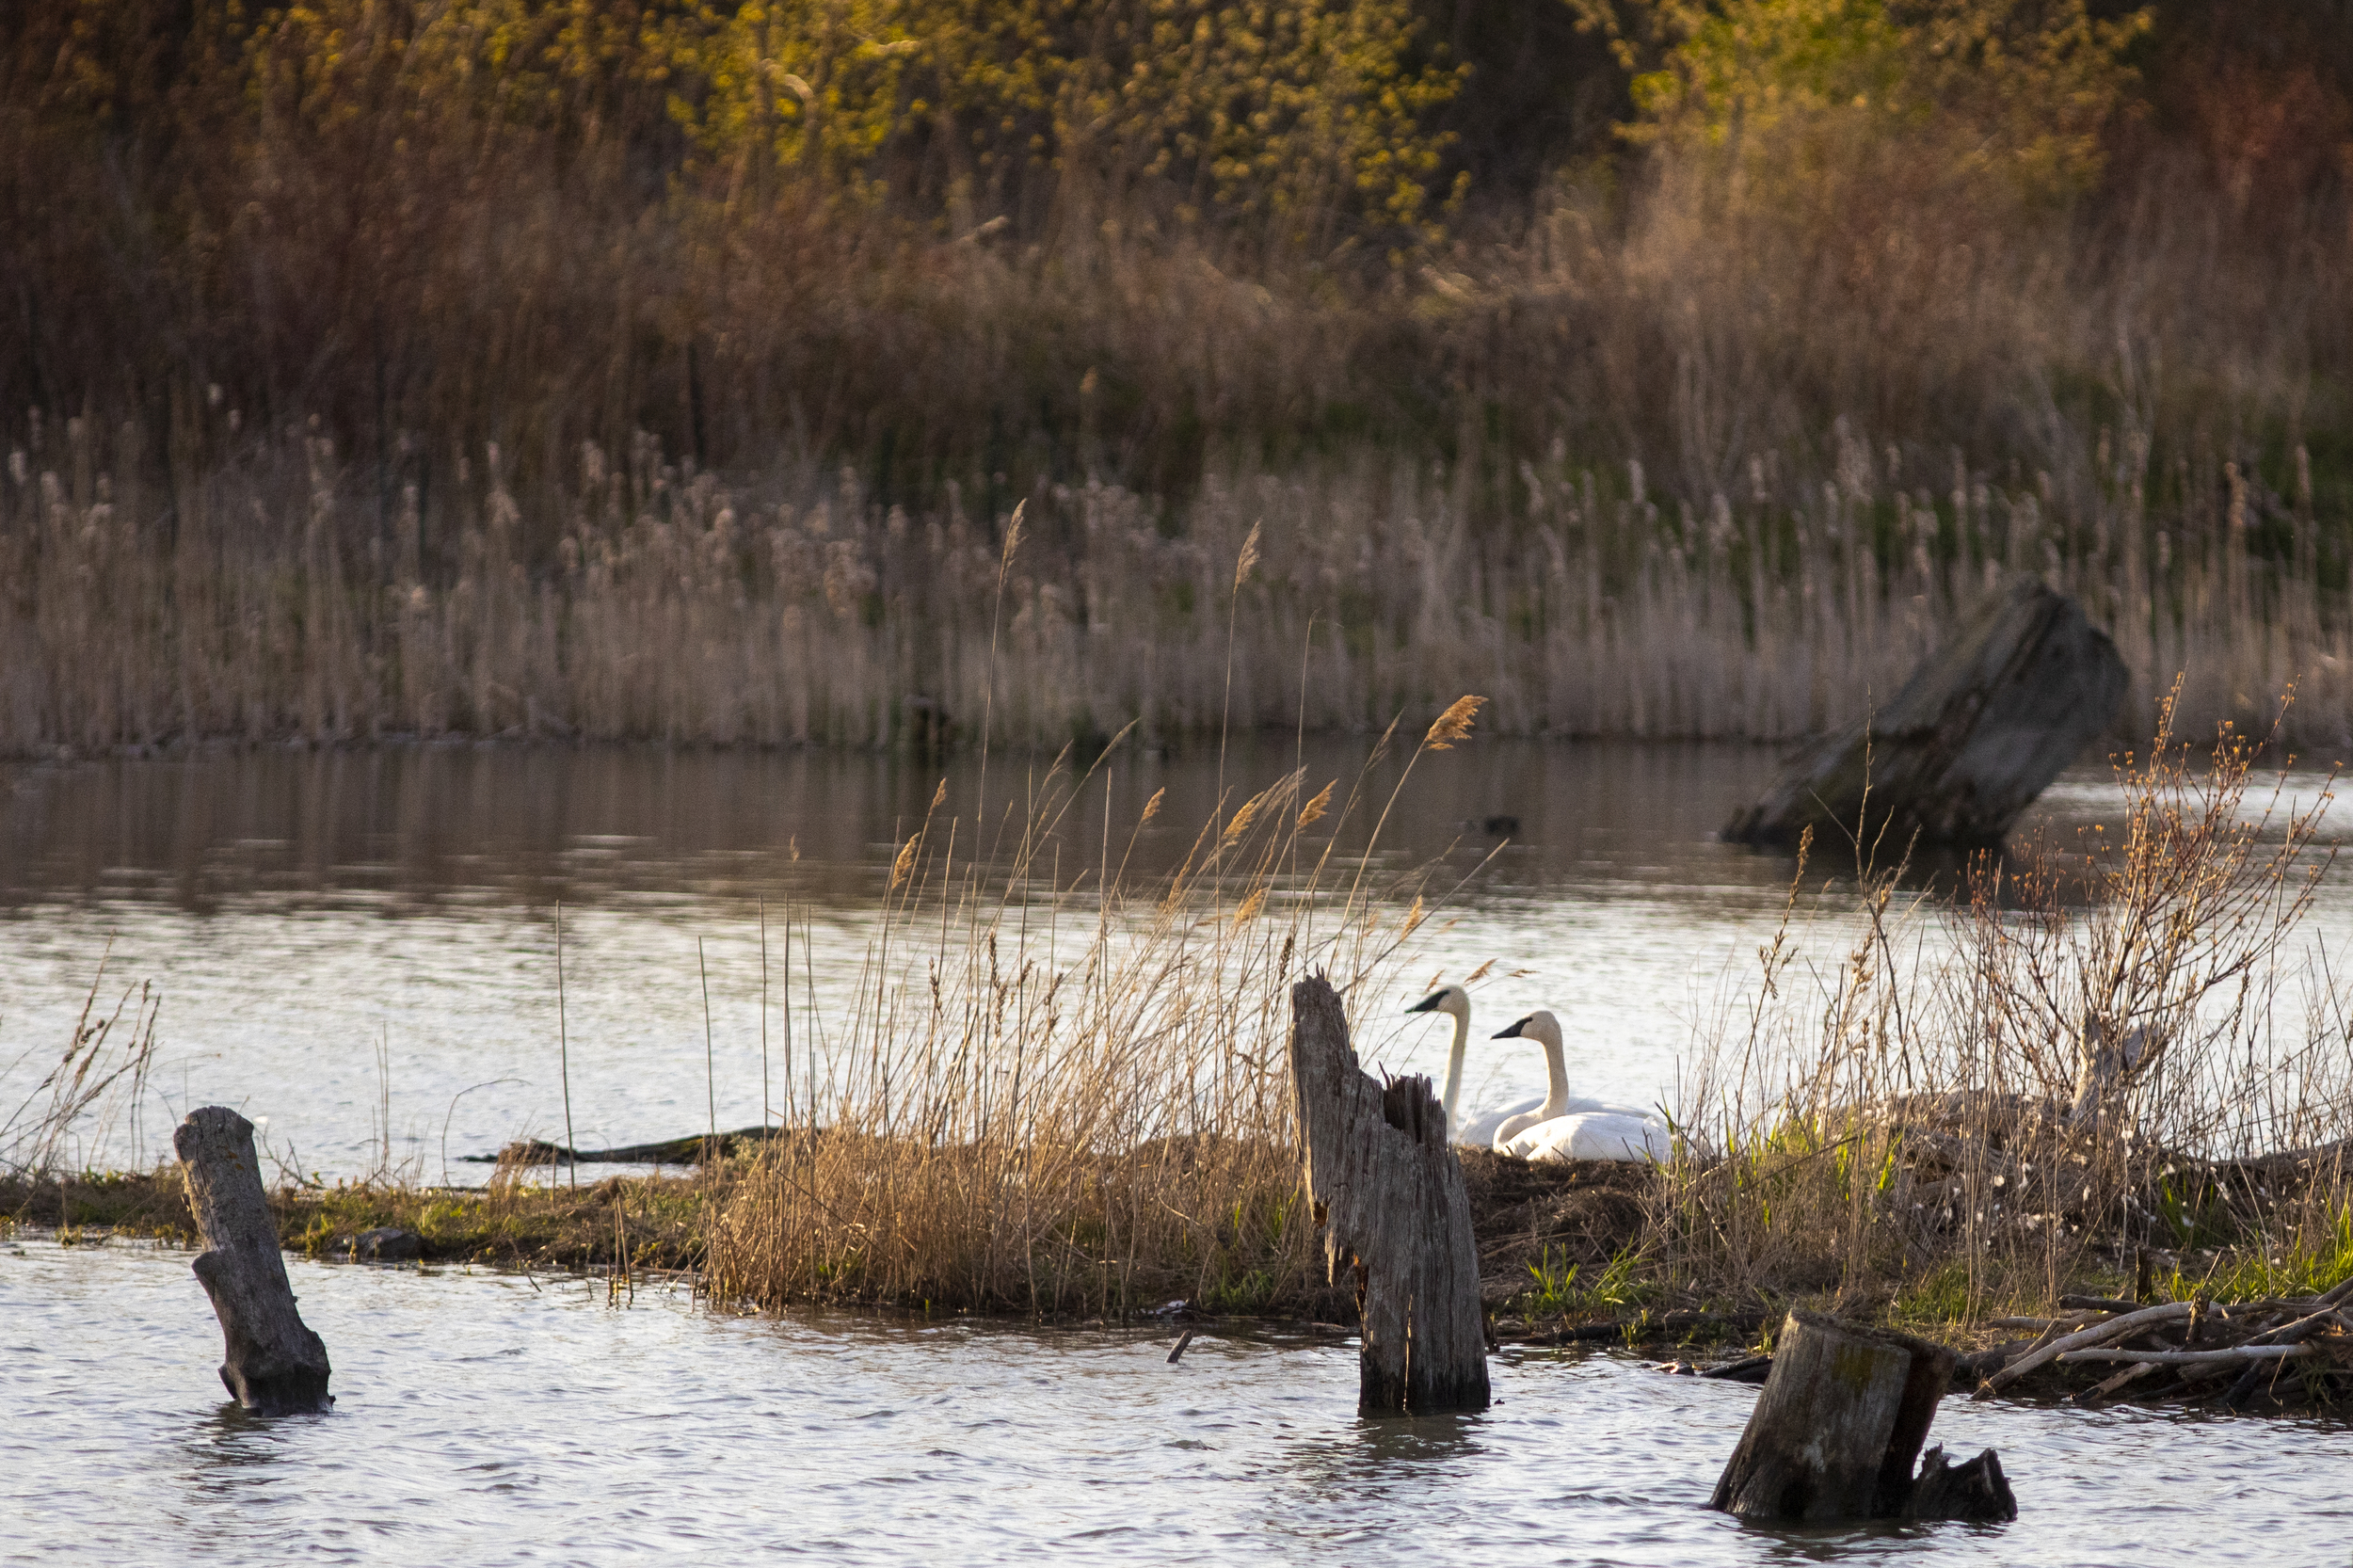 Two swans sit side by side on an island in the middle of a pond at Tommy Thompson Park.